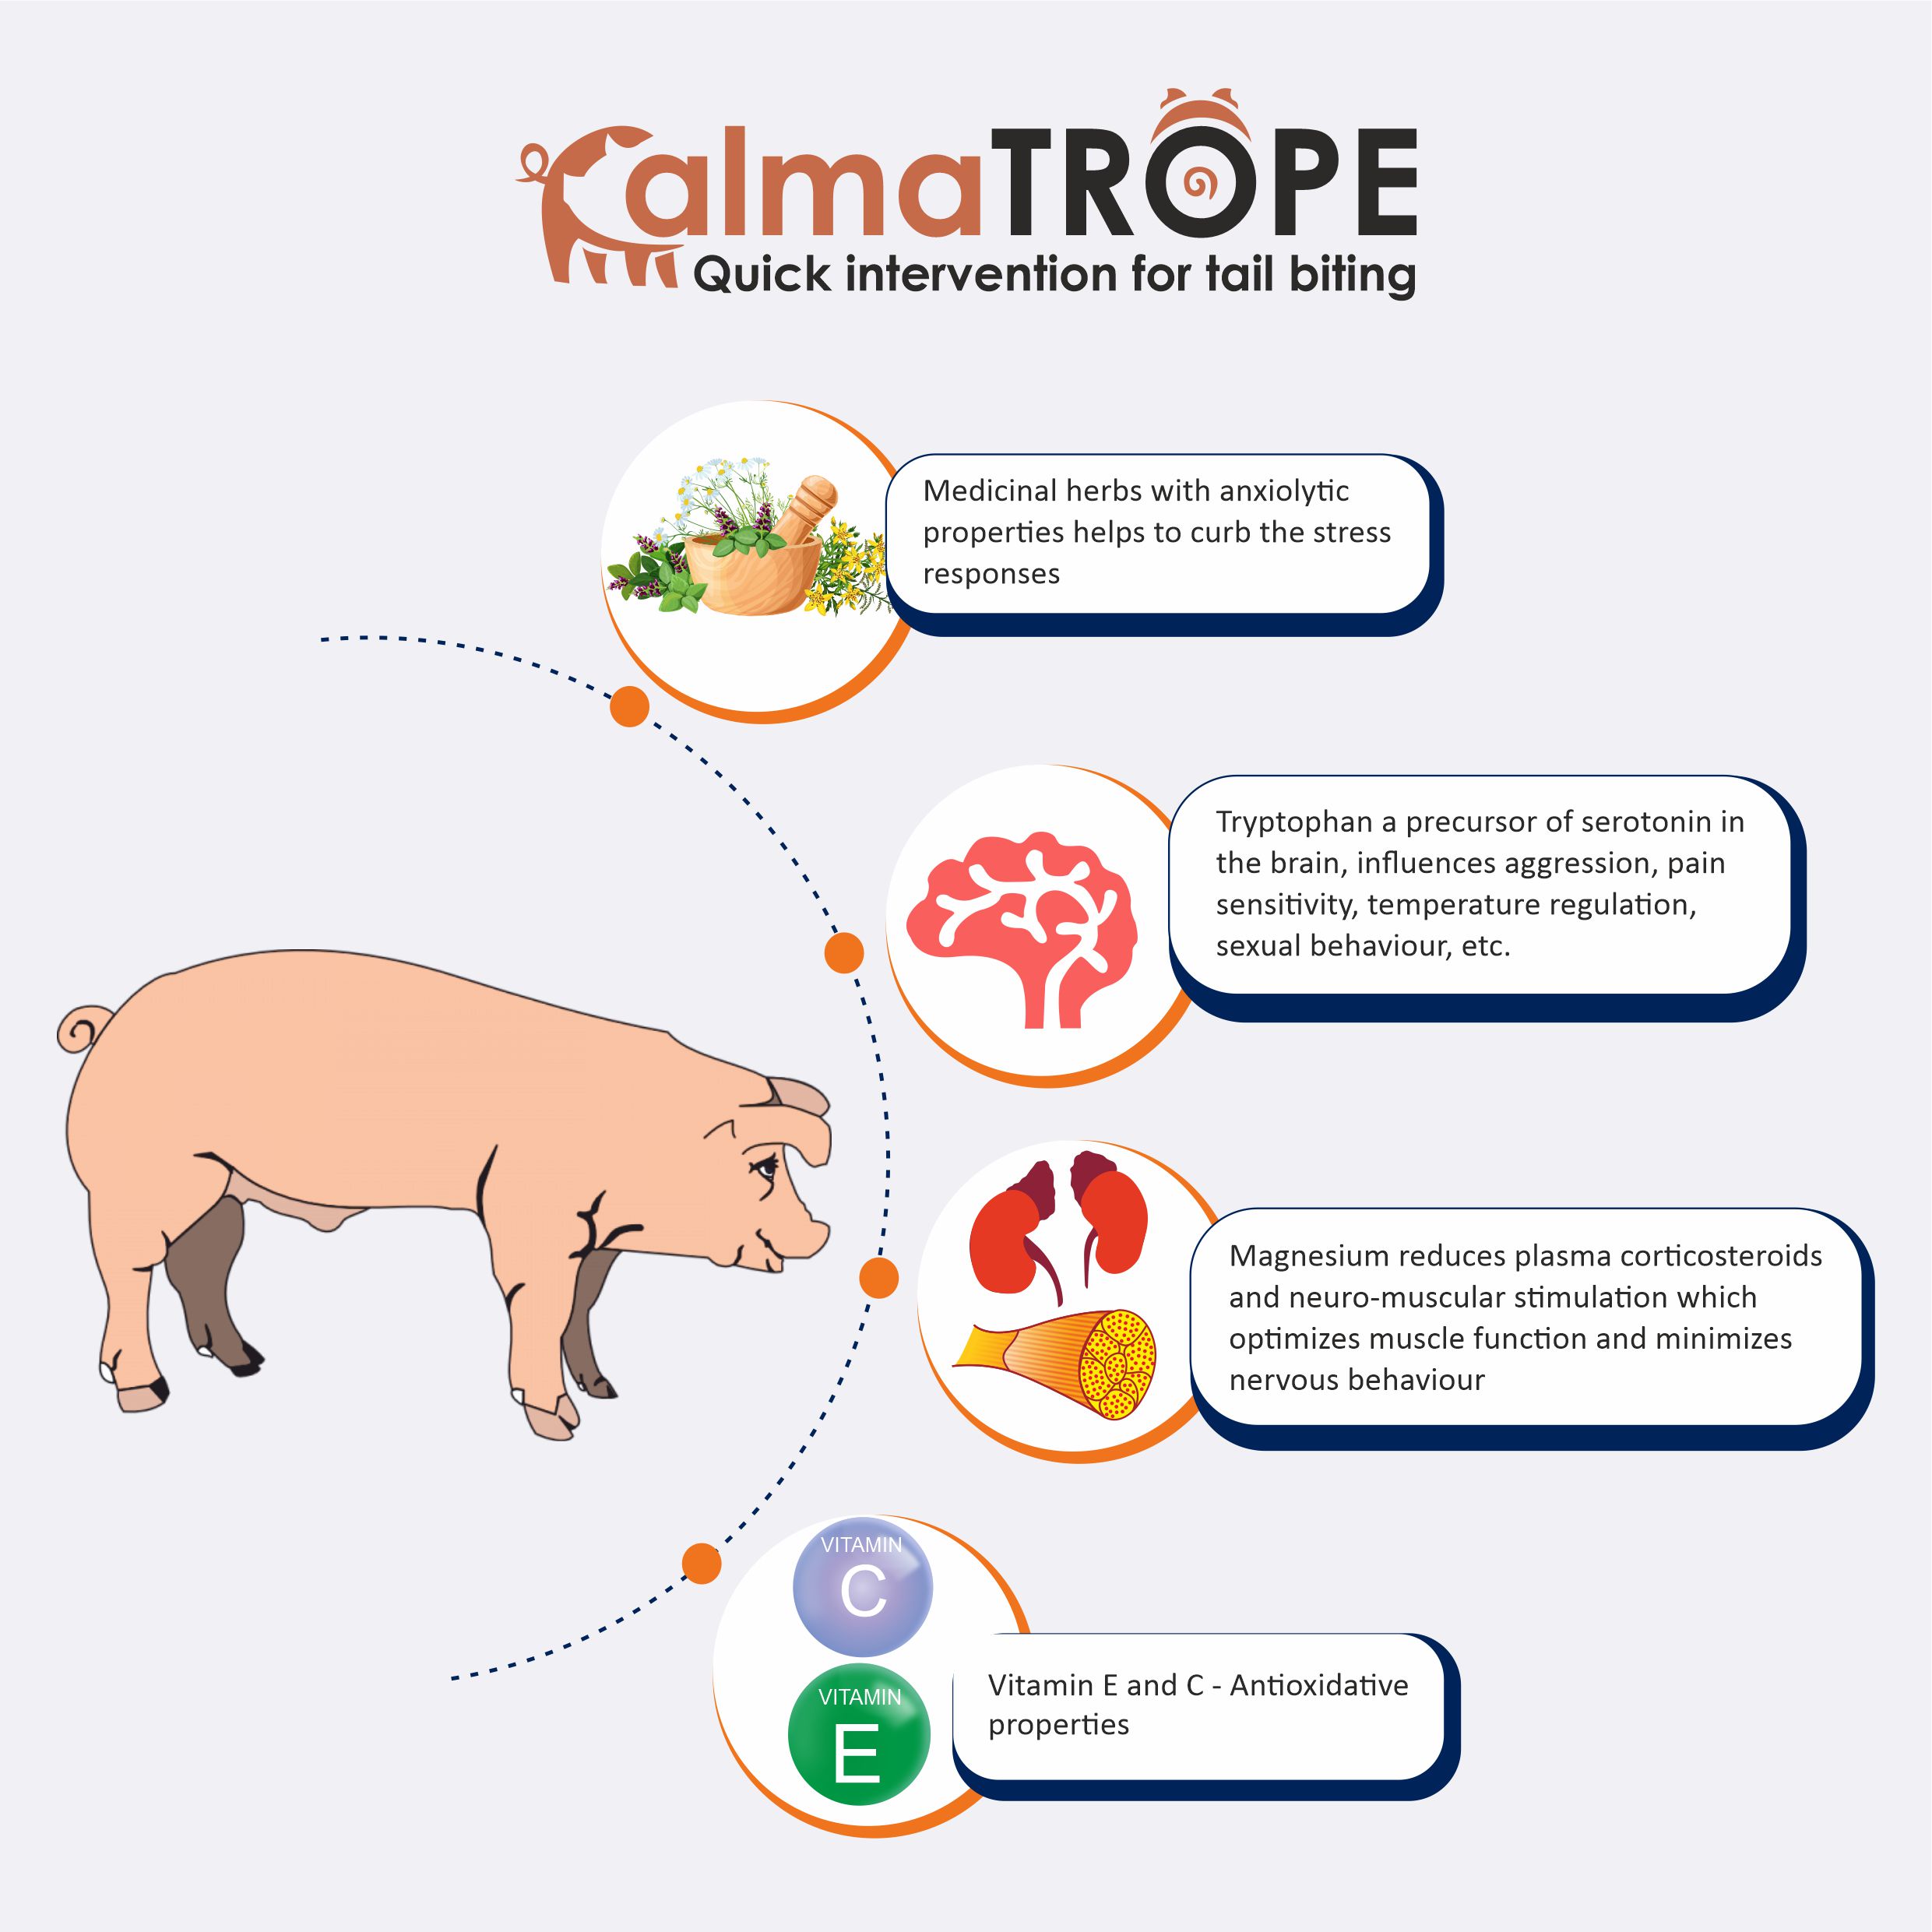 CALMATROPE - Mechanism of Action- MOA - It reduces tail-biting in pigs, solution for tail biting in Swine, pig tail biting , control tail biting in pigs, Anxiety in pigs, Swine farm management.